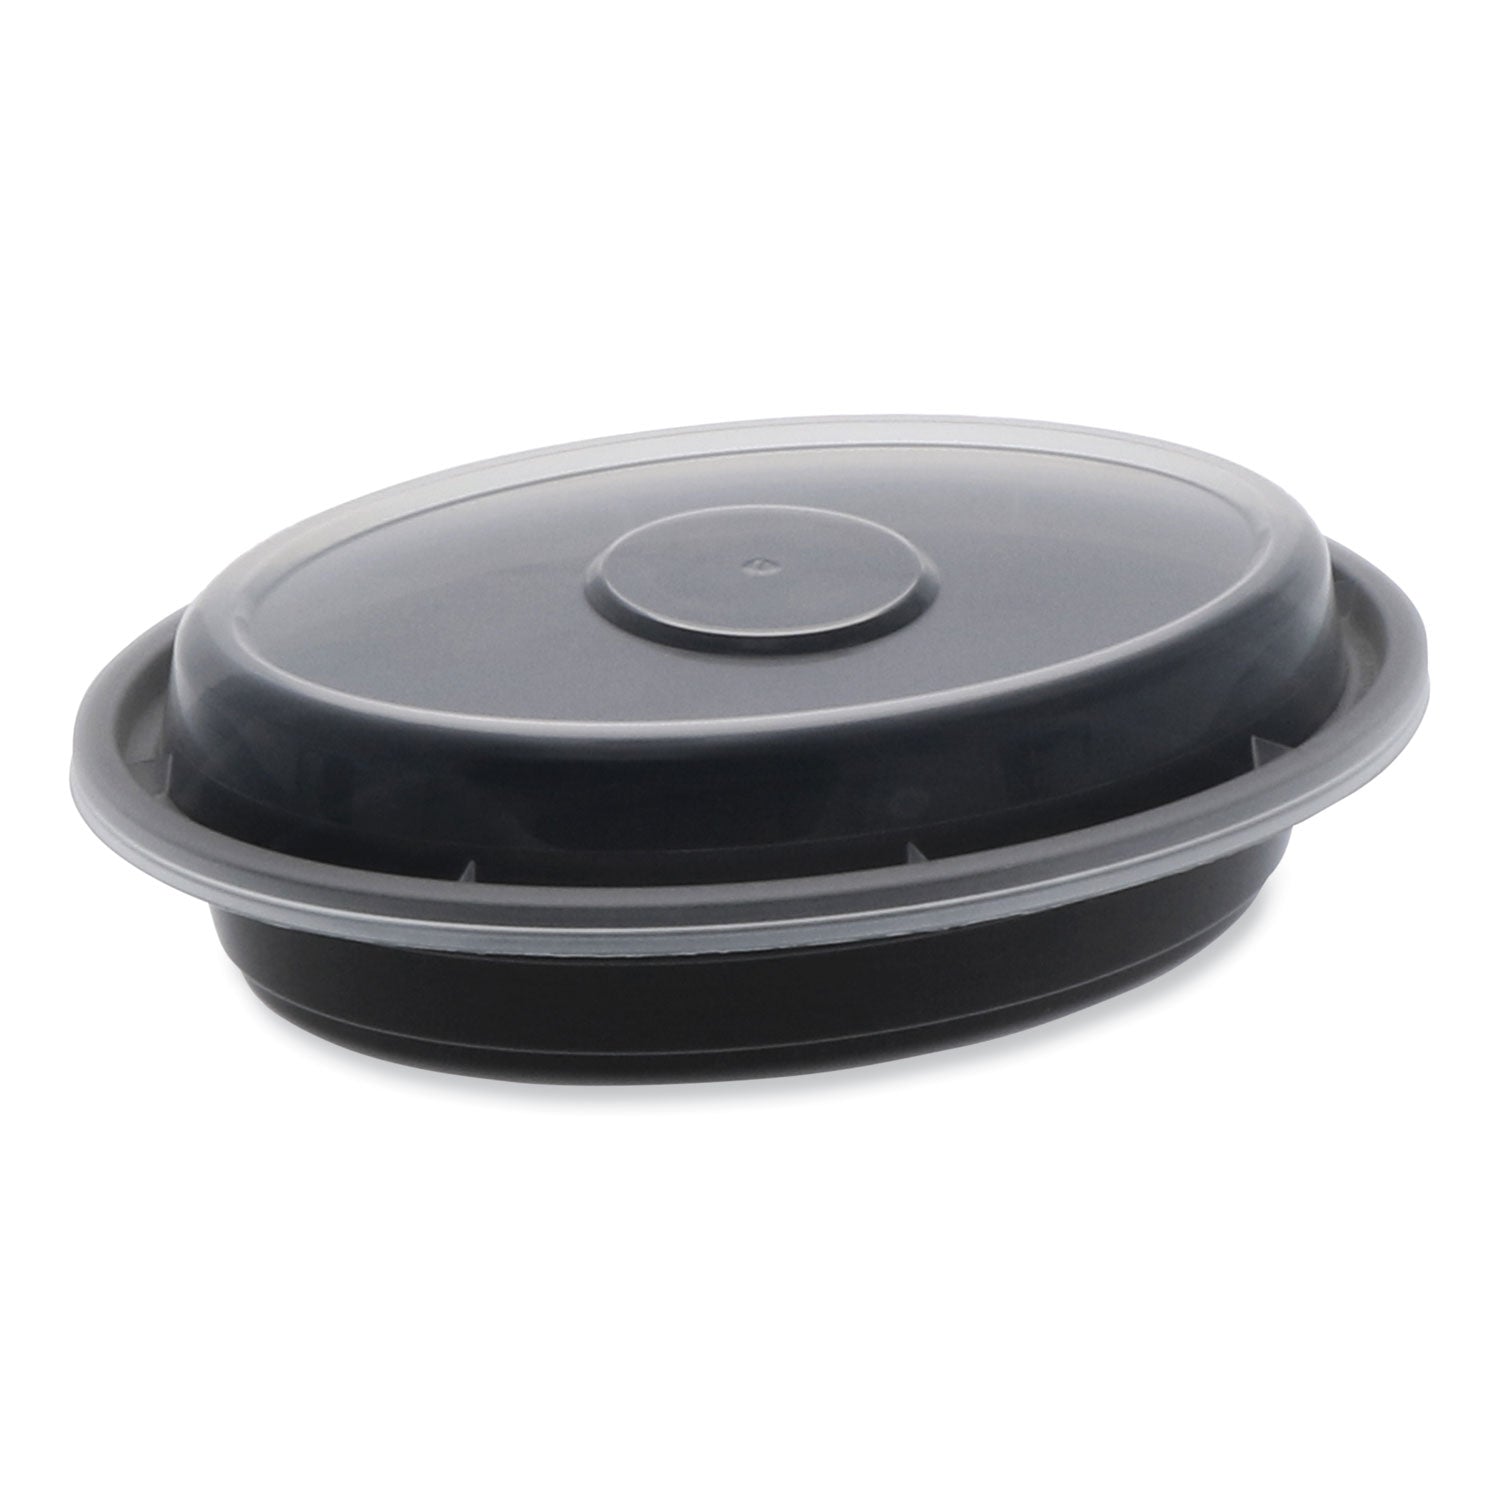 newspring-versatainer-microwavable-containers-oval-6-oz-57-x-4-x-11-black-clear-plastic-150-carton_pctoc06b - 1